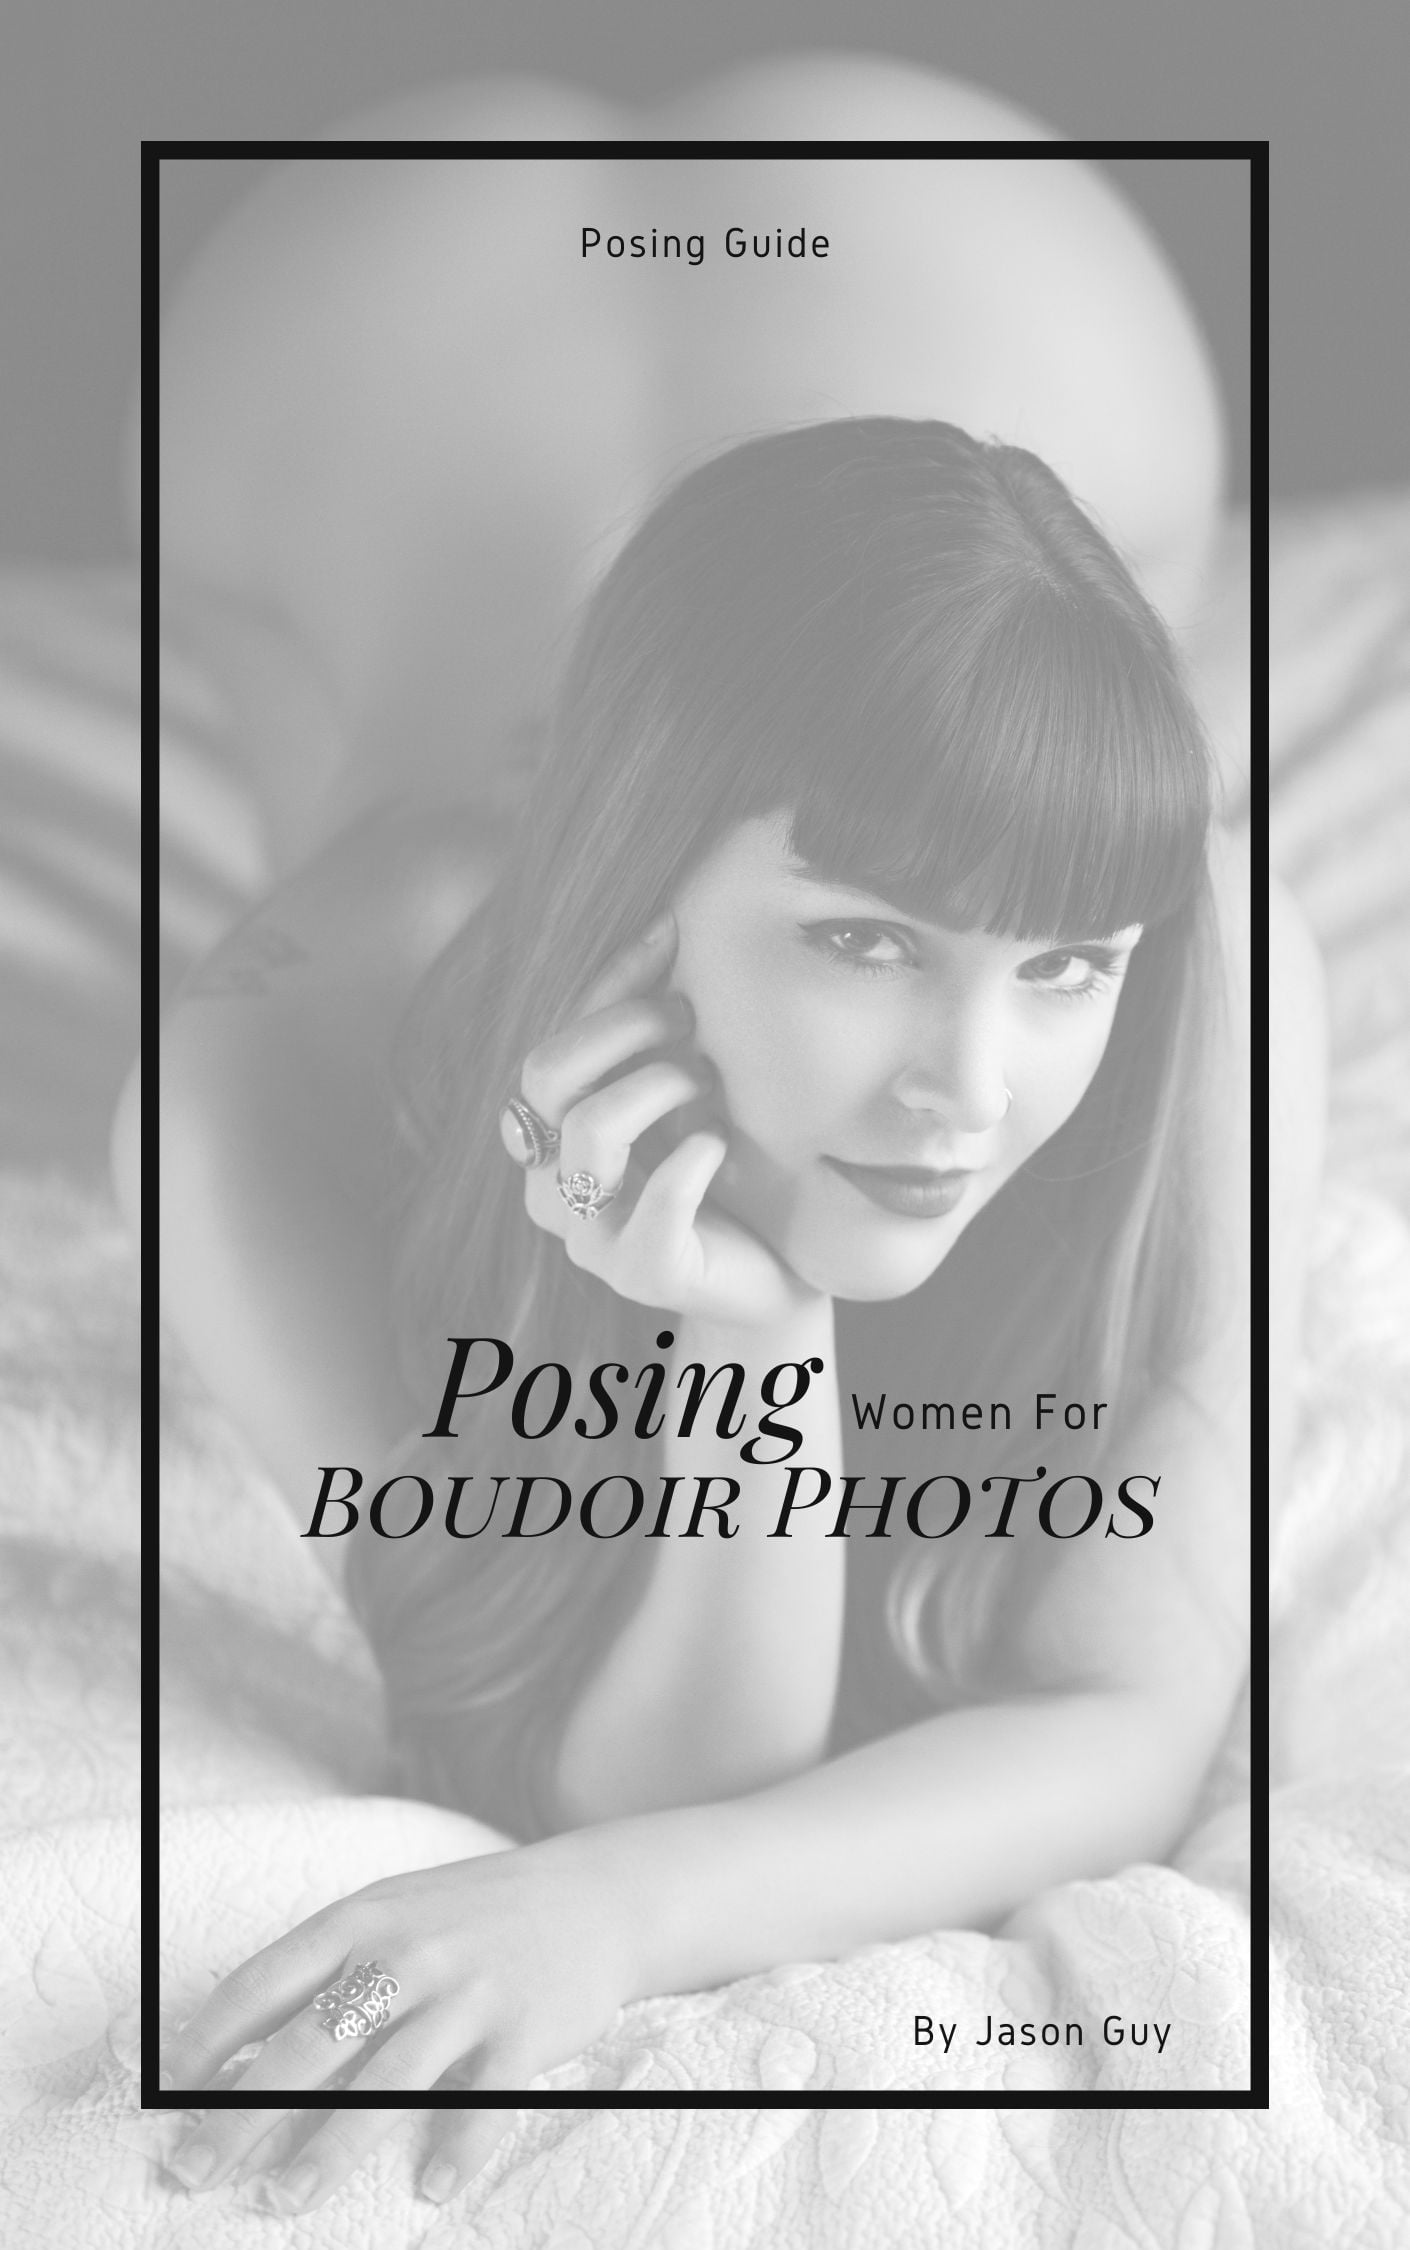 The Complete Photography Posing Guide (100+ Poses)